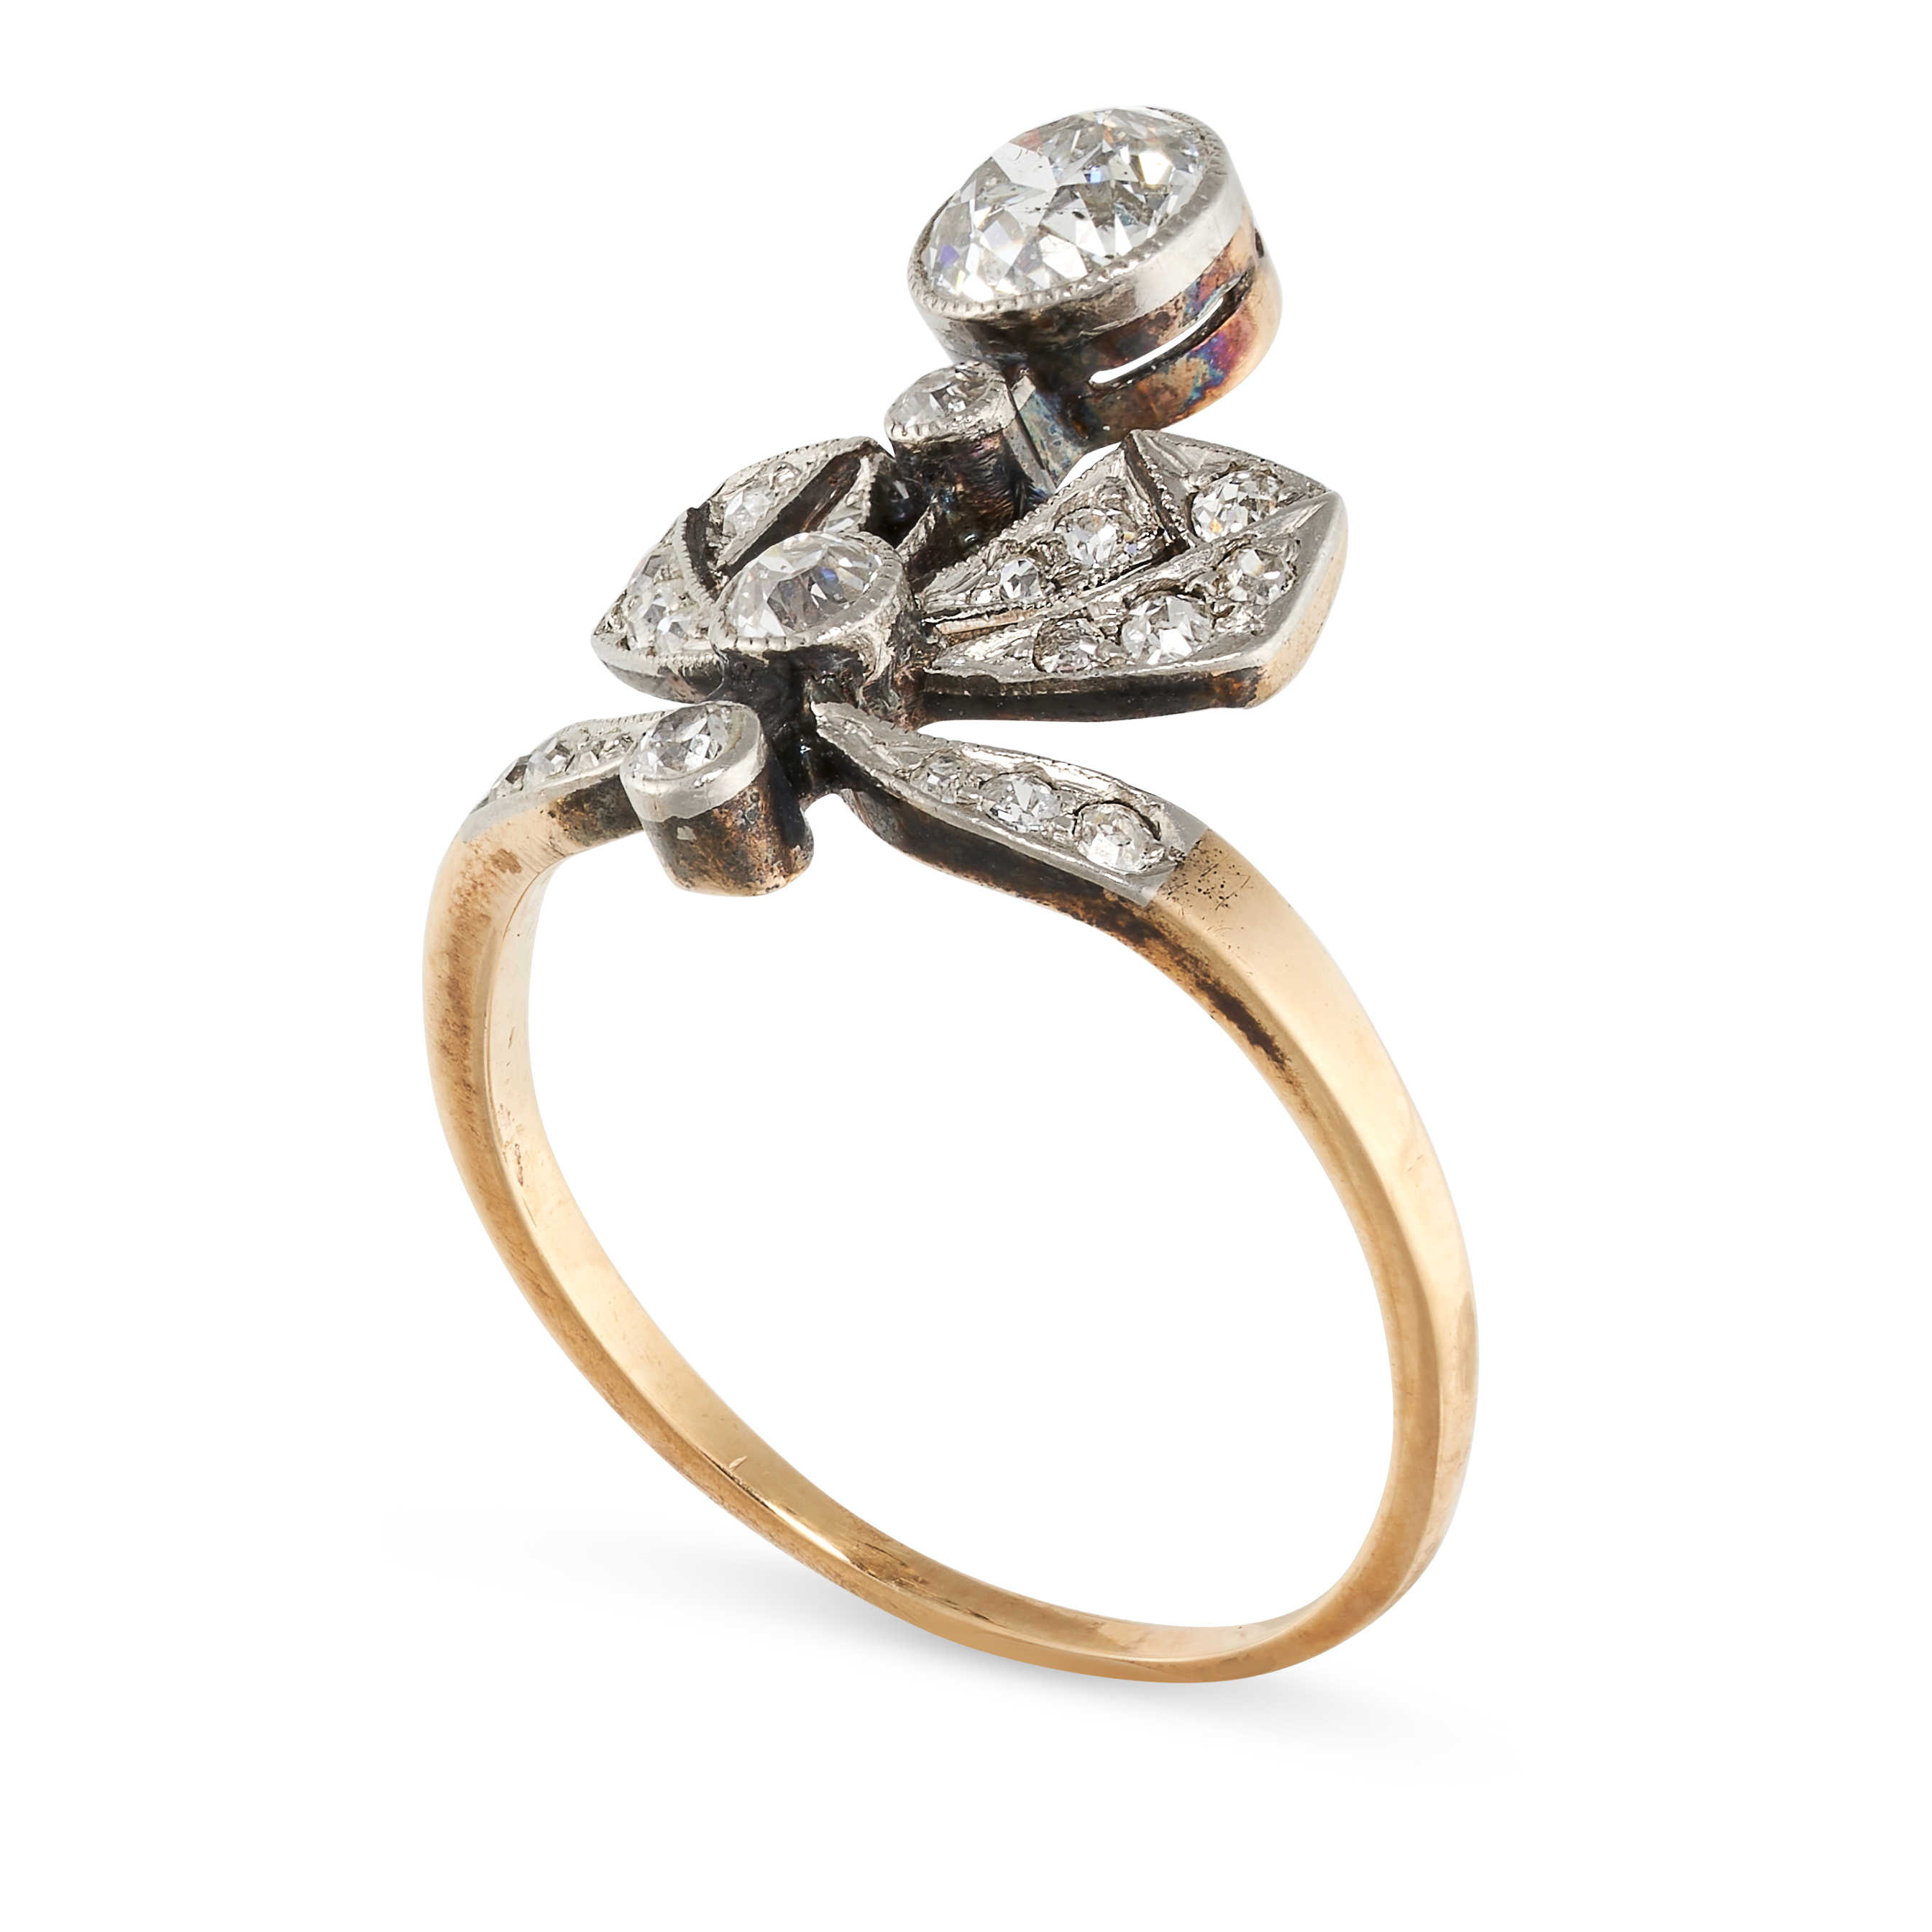 NO RESERVE - AN ANTIQUE DIAMOND TIARA RING, CIRCA 1905  Made in yellow gold and platinum, designed - Image 2 of 2